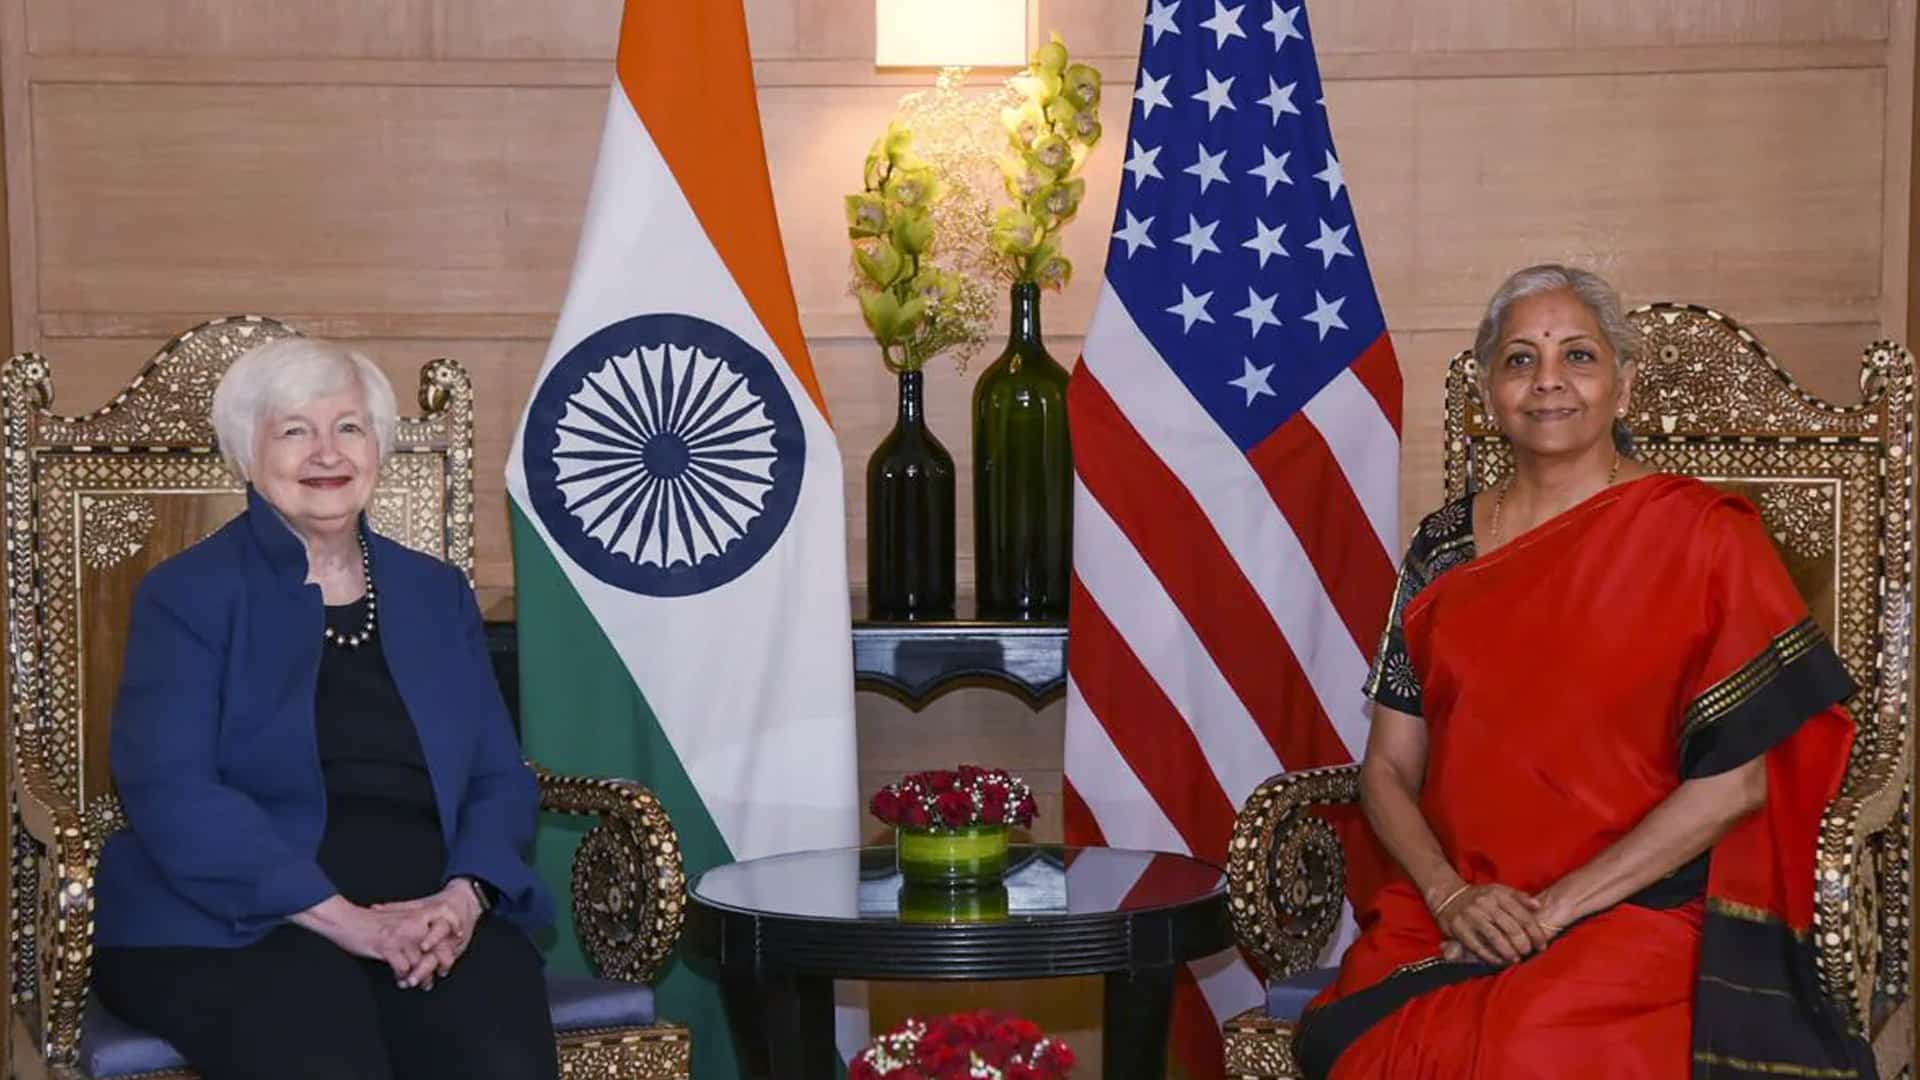 India looks to strengthen ties with US with greater vigour: Nirmala Sitharaman